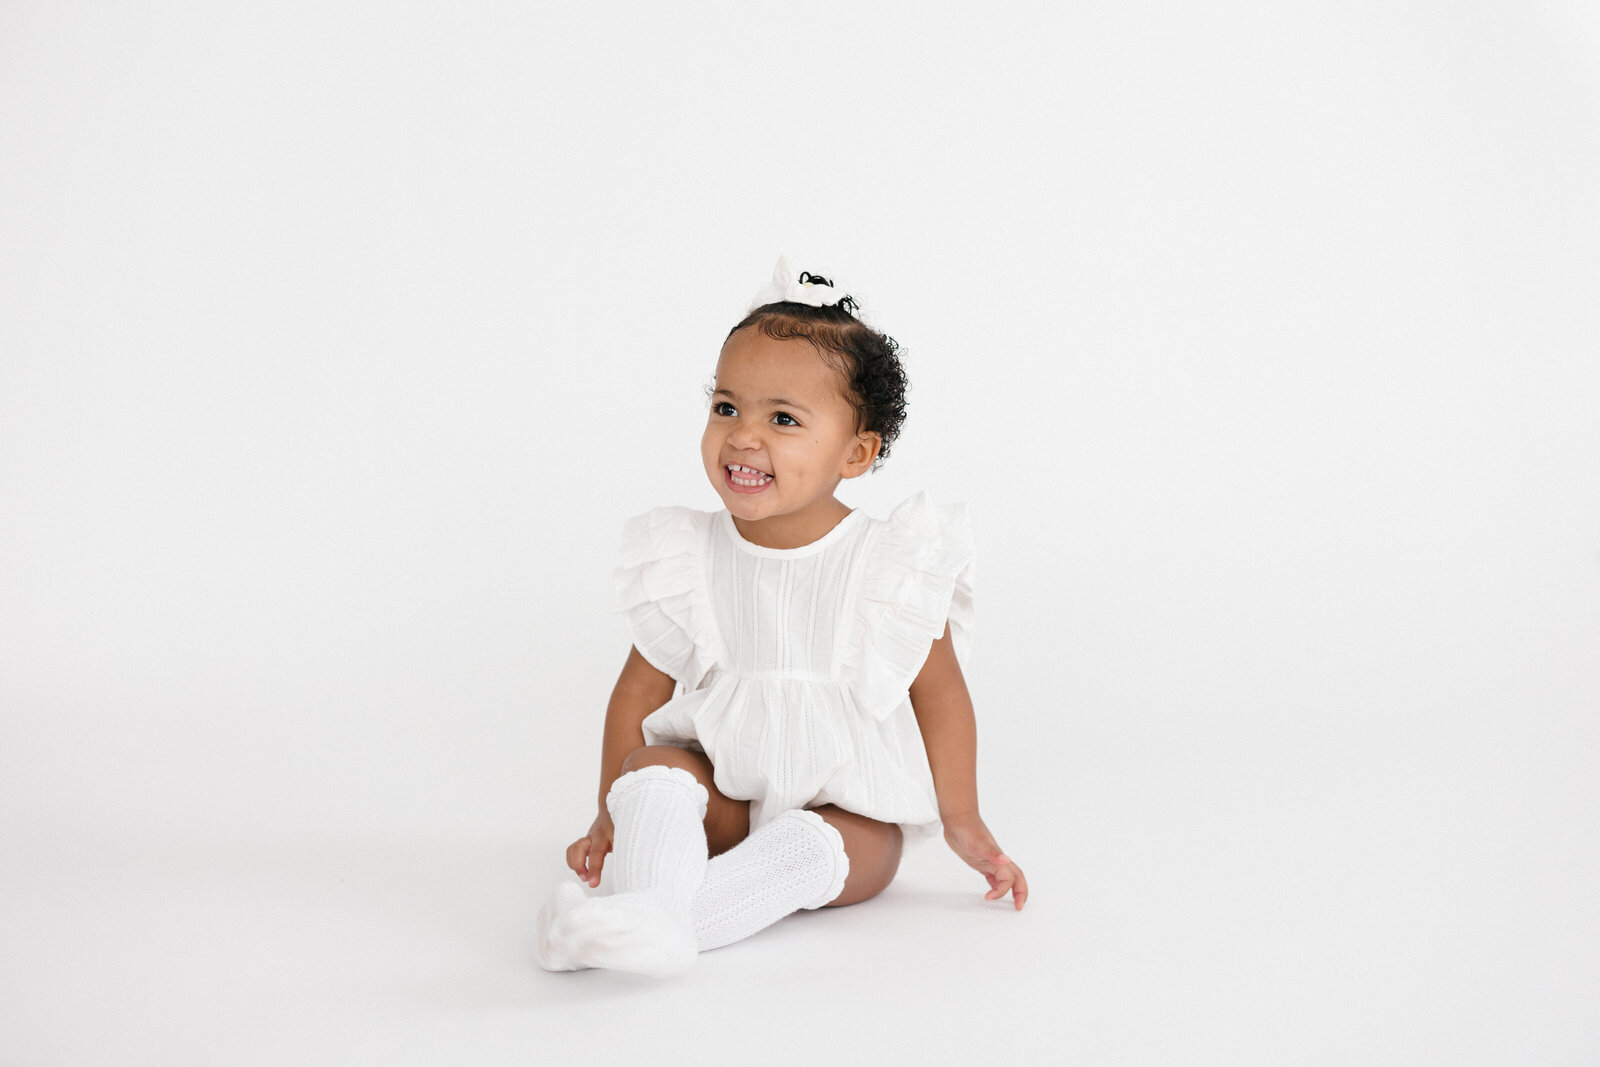 Baby girl sitting on a white backdrop wearing a white outfit and white knee-high socks smiling and laughing